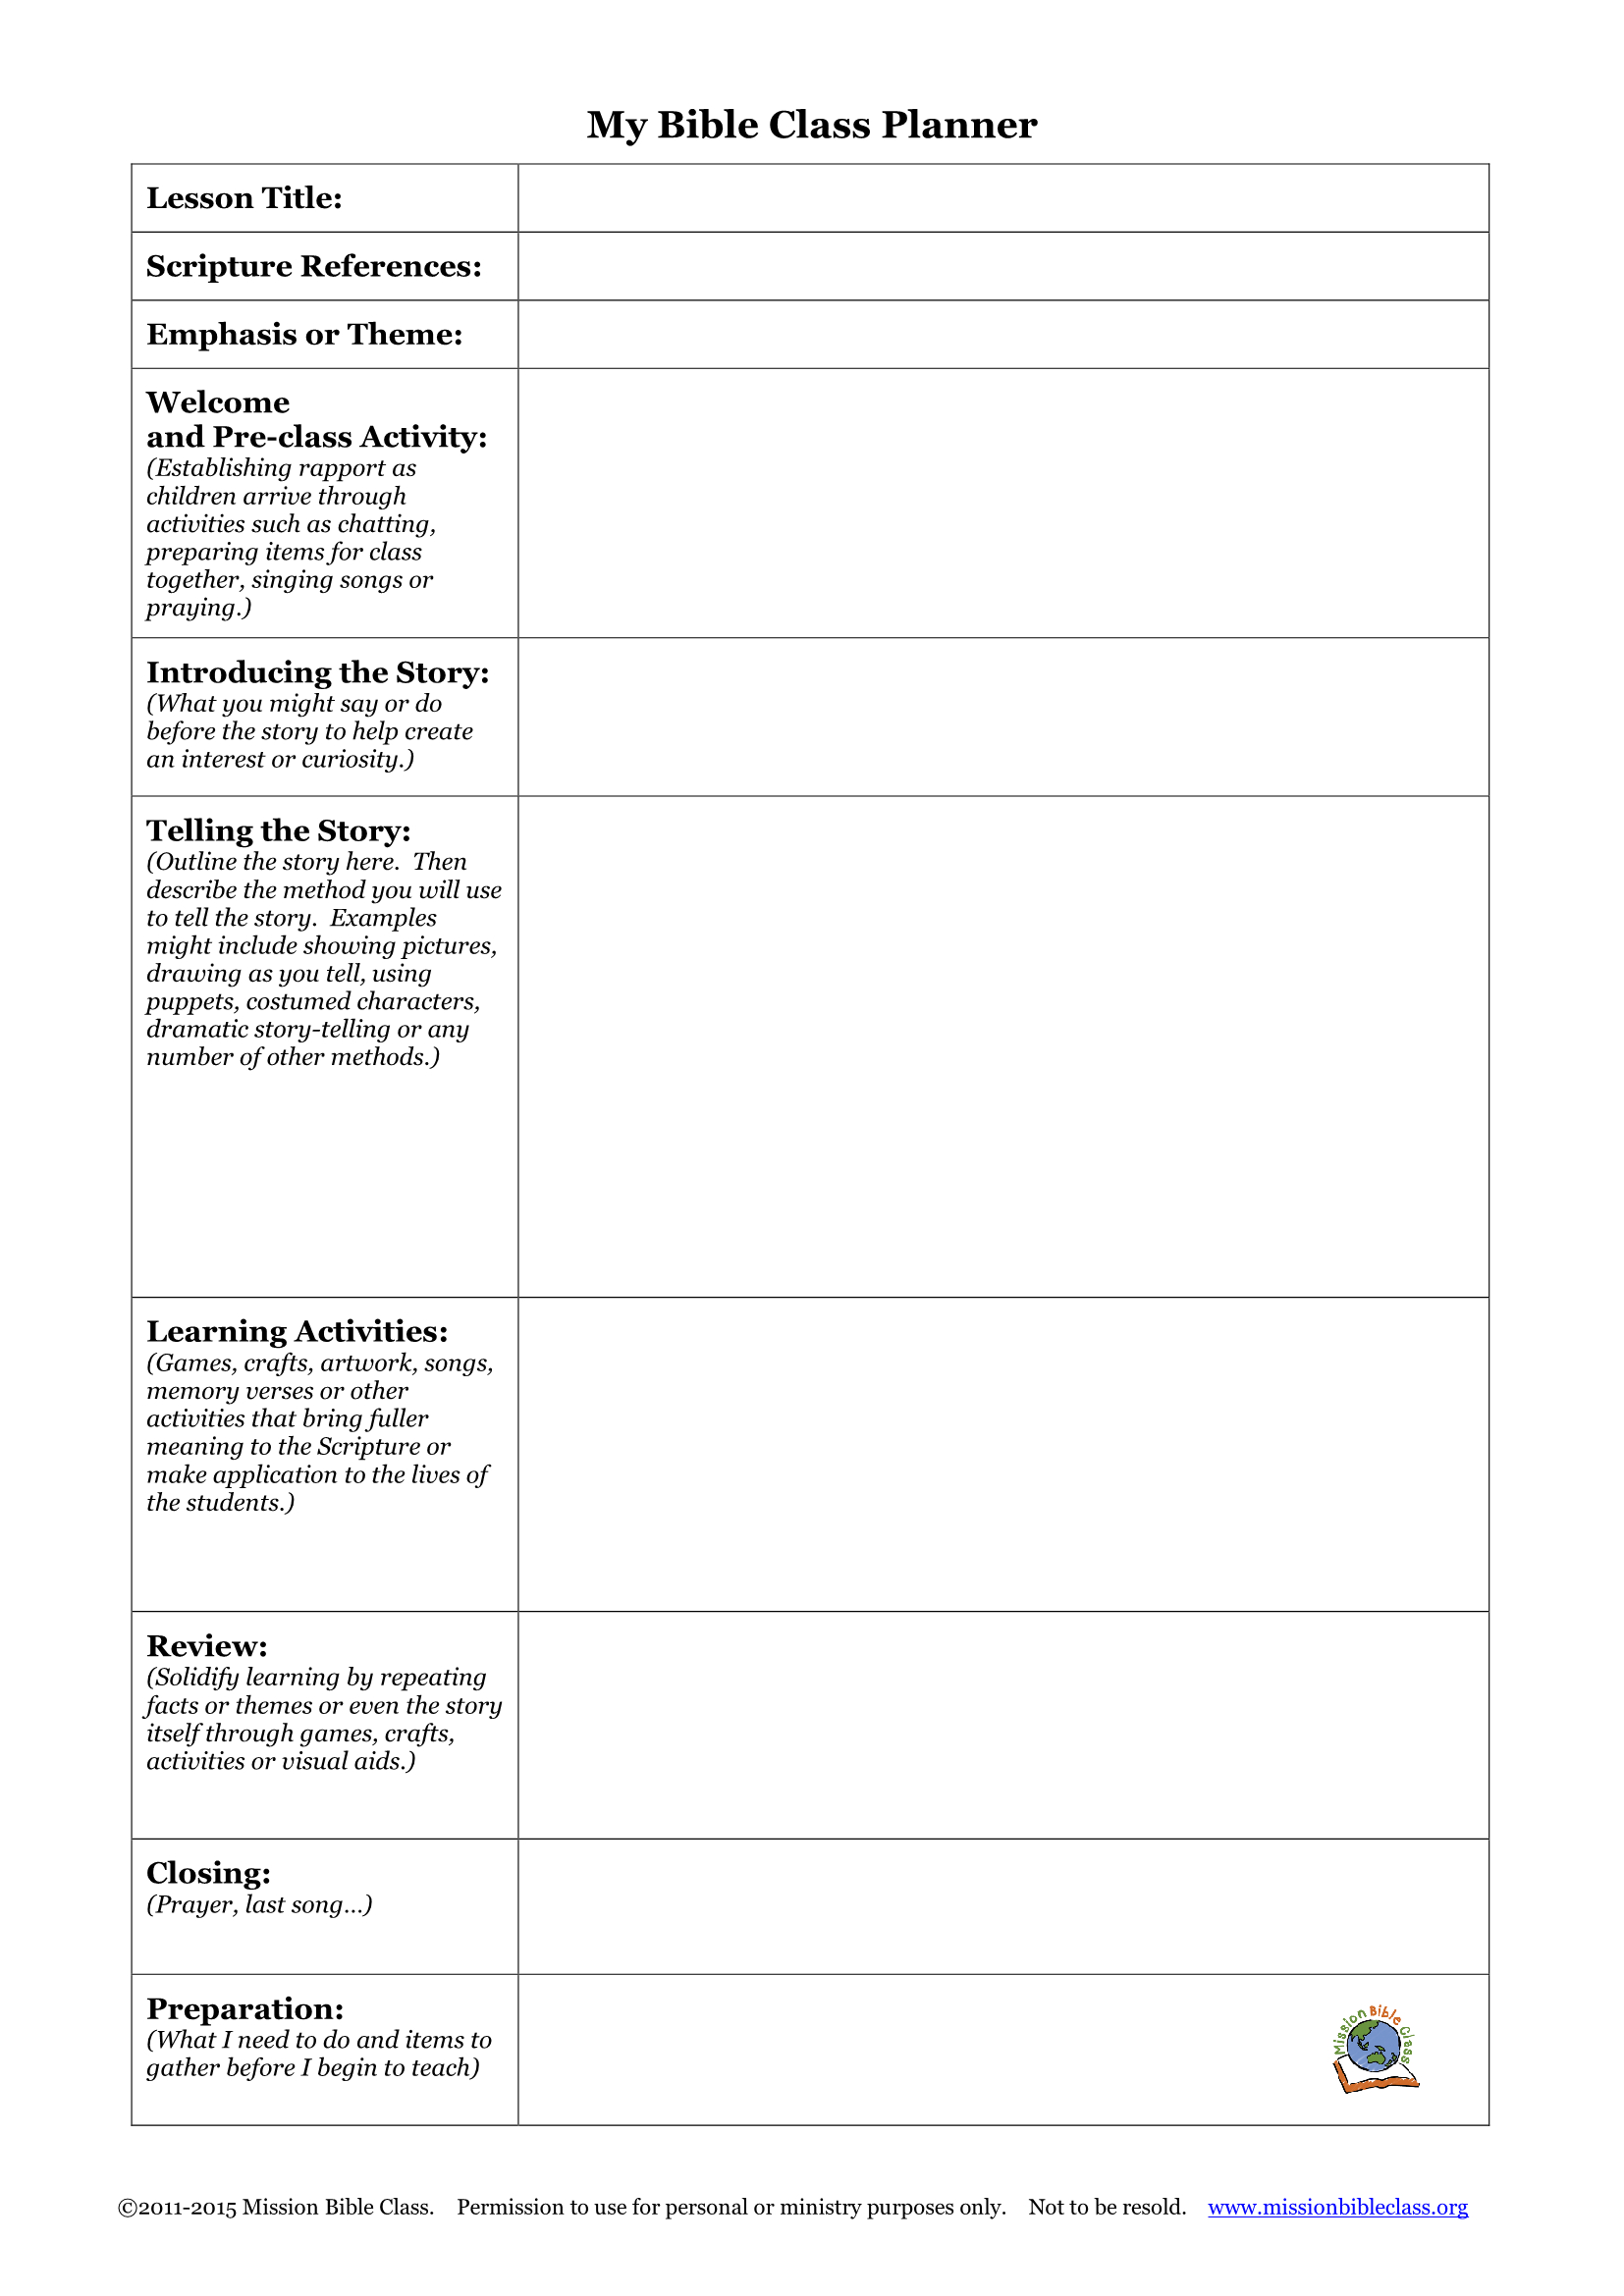 Blank Lesson Plan Templates To Print | Teaching The Bible To In Blank Syllabus Template